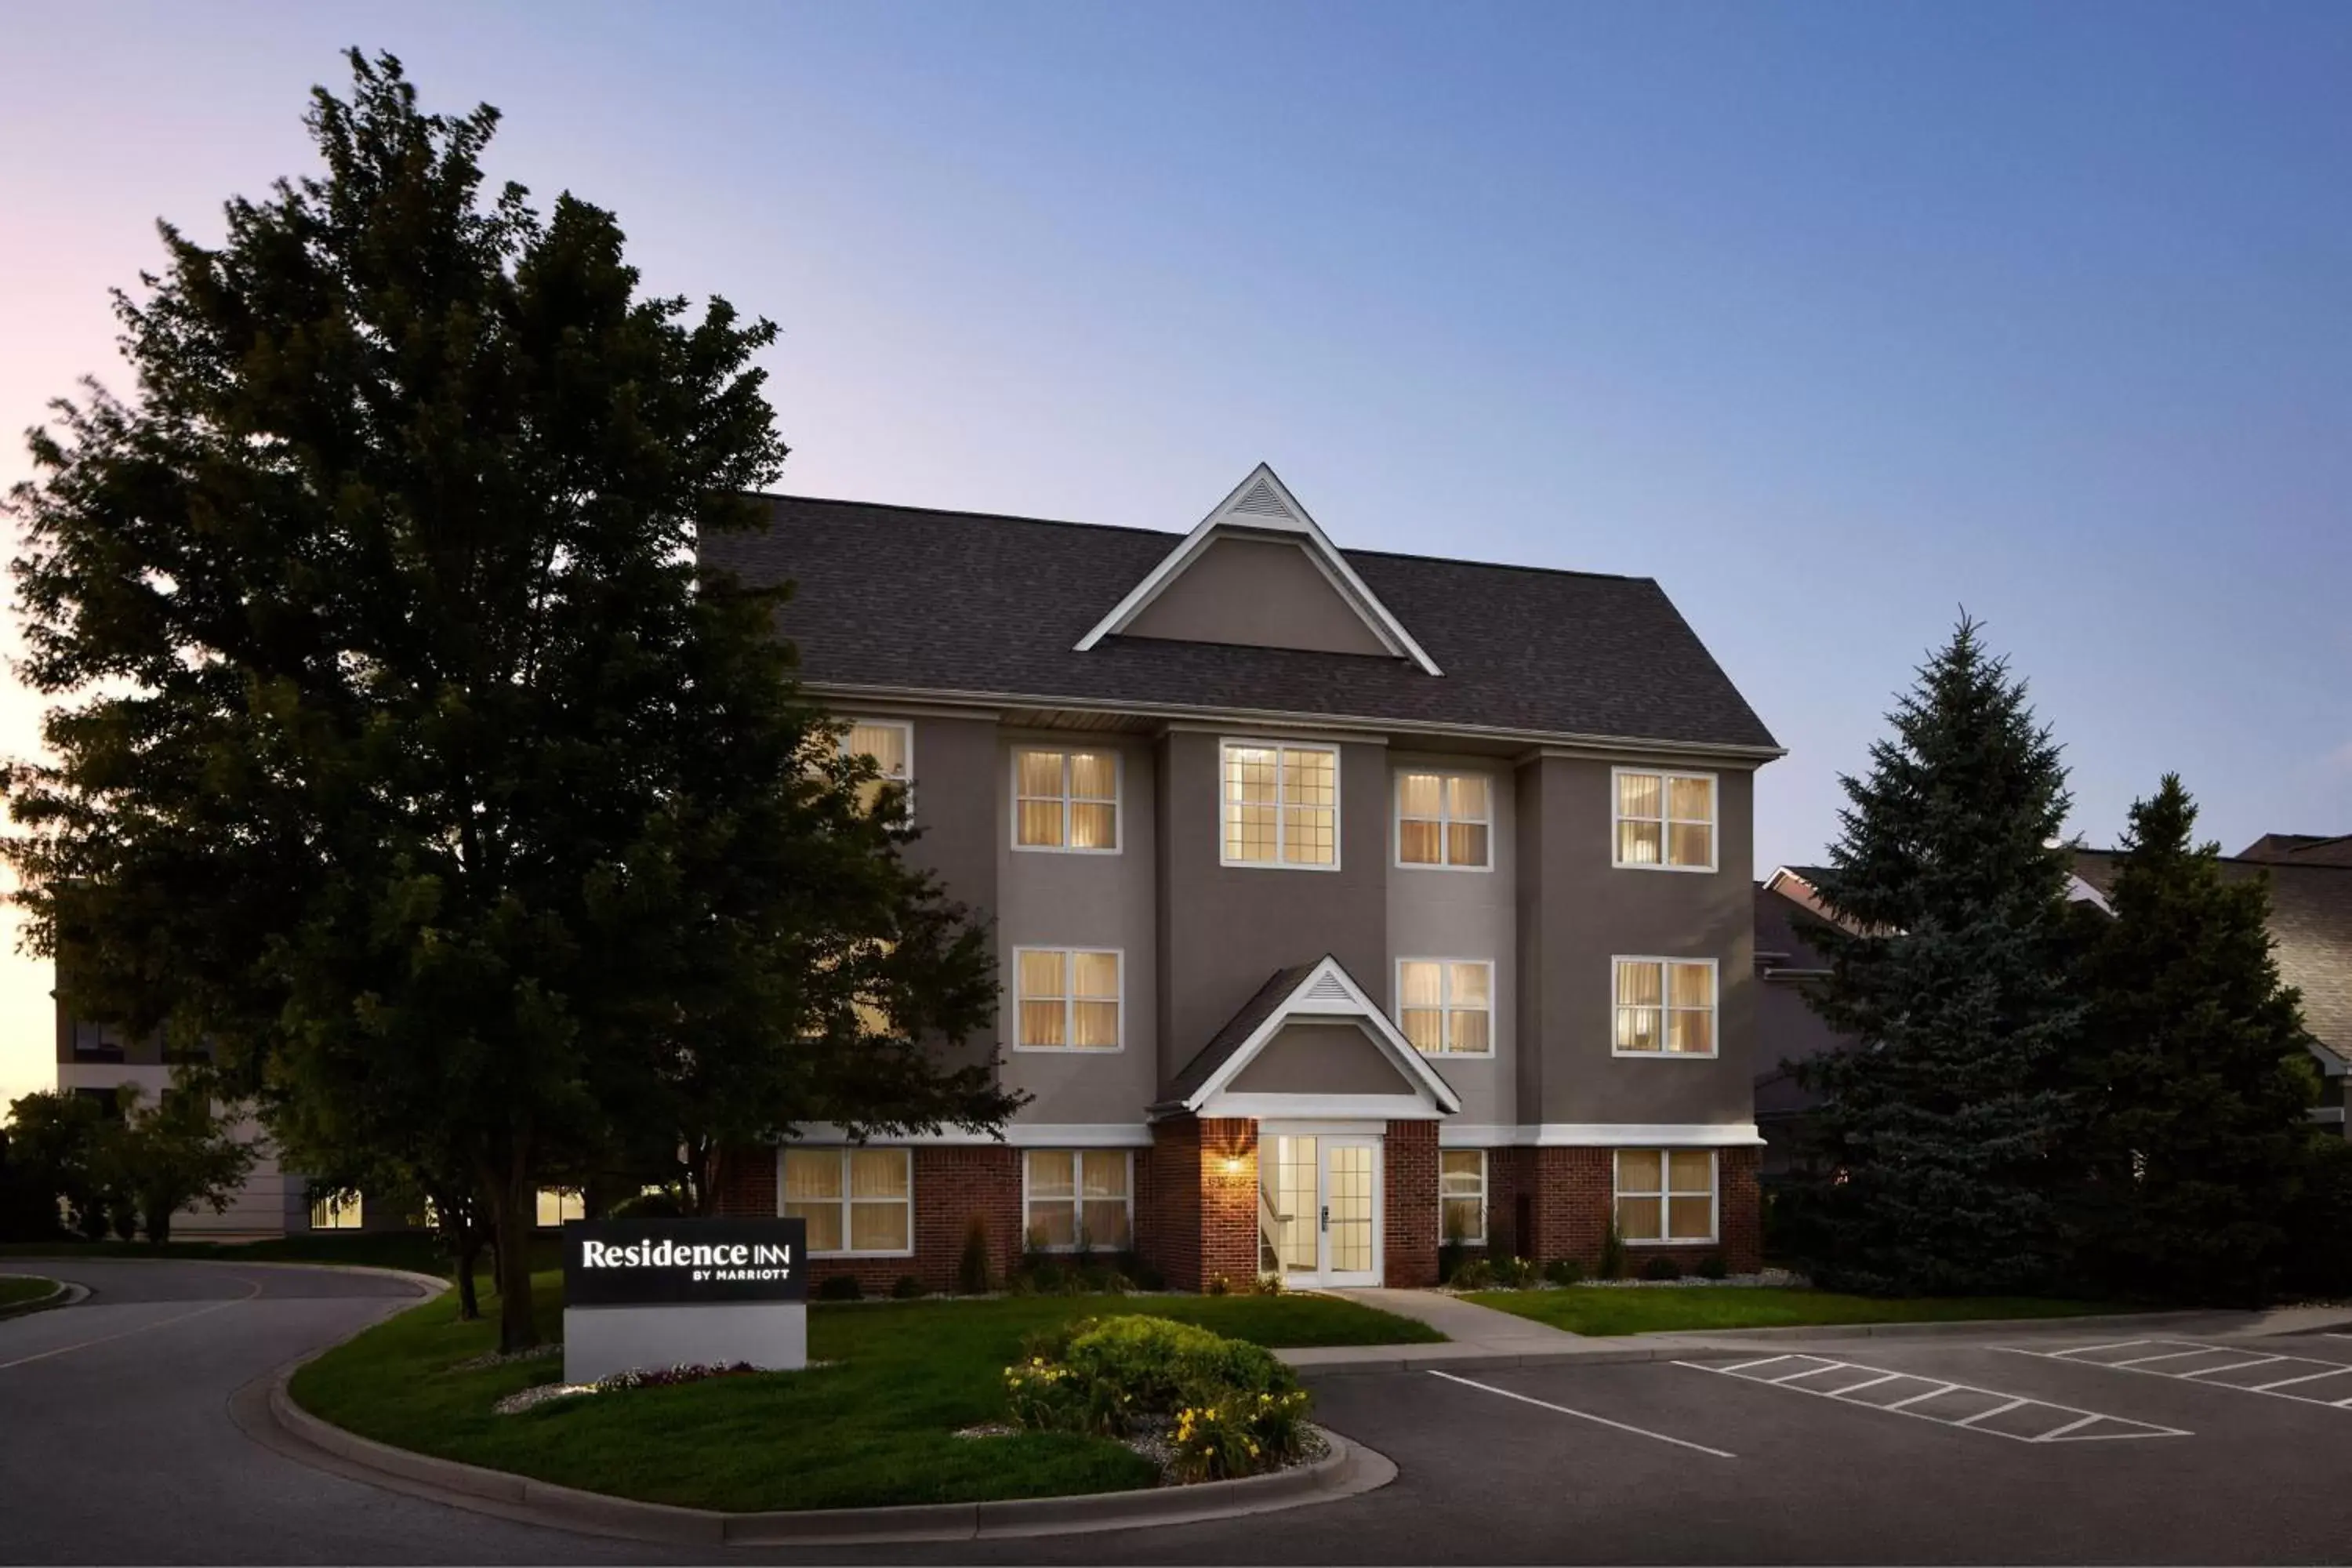 Property Building in Residence Inn Indianapolis Northwest